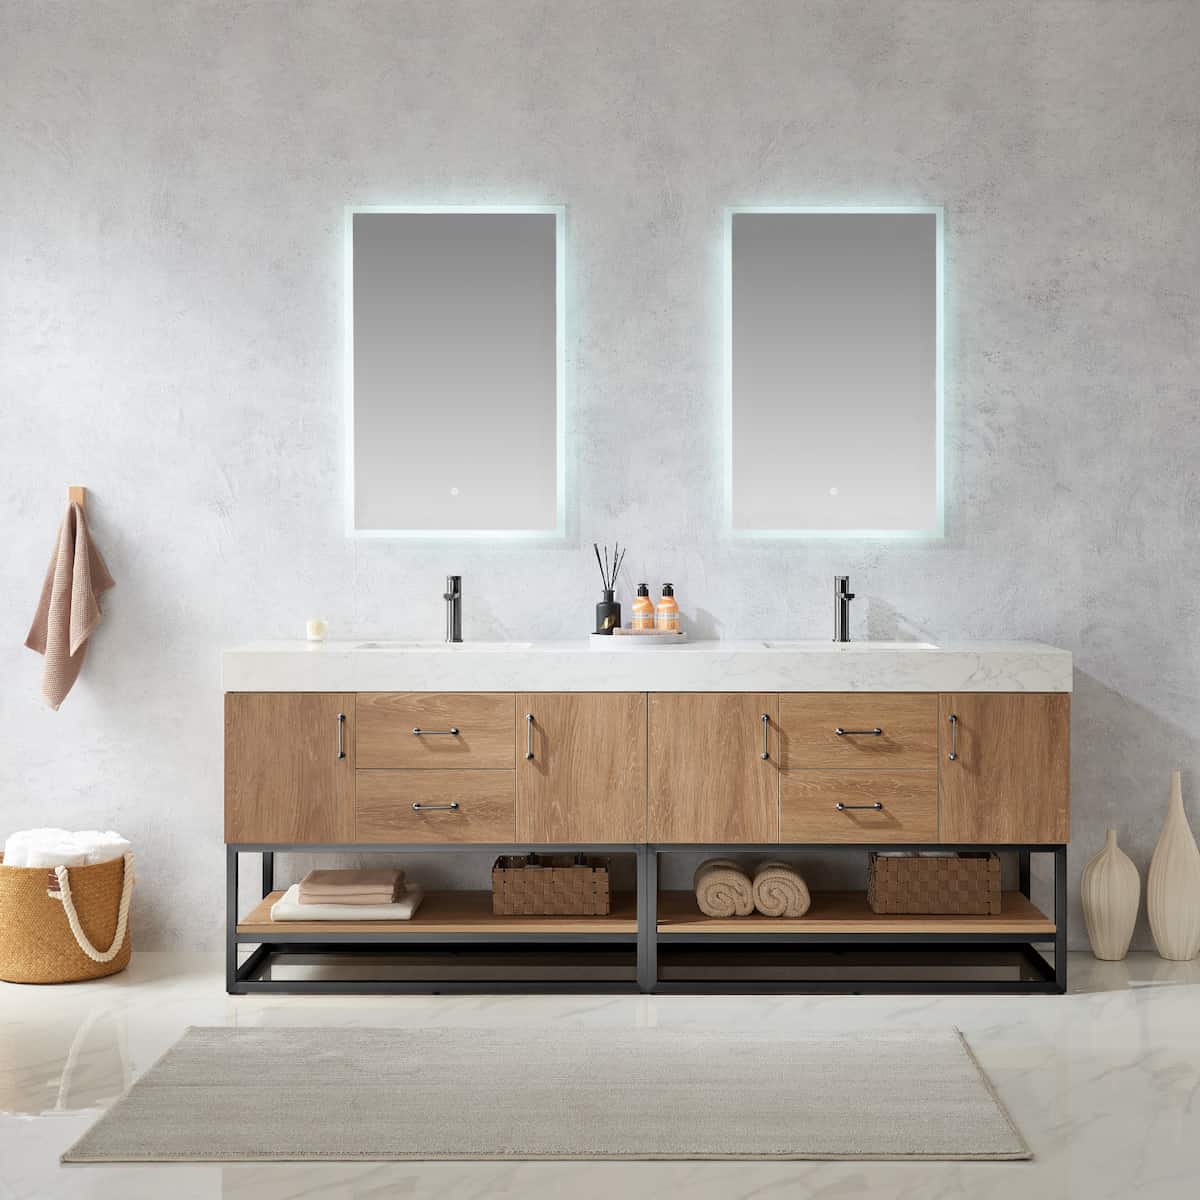 Vinnova Alistair 84 Inch Freestanding Double Vanity in North American Oak and Matte Black Frame with White Grain Stone Countertop With Mirrors in Bathroom 789084B-NO-GW